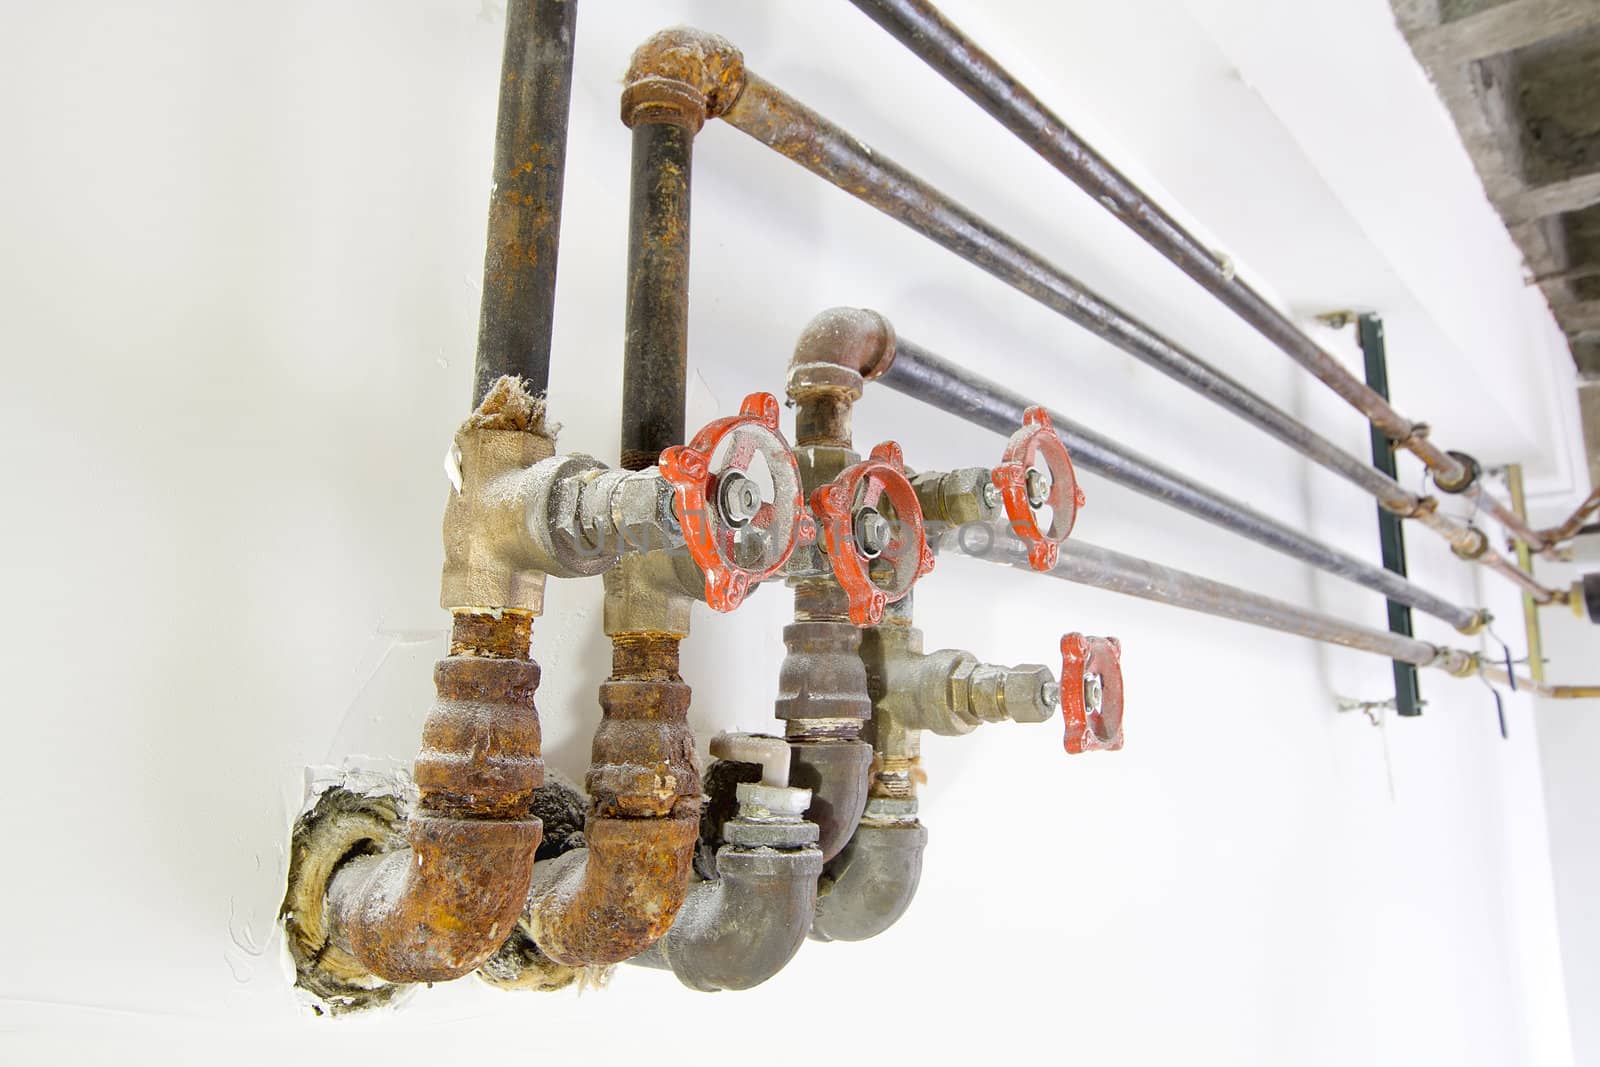 Old Plumbing Pipes with Valves on Wall by jpldesigns